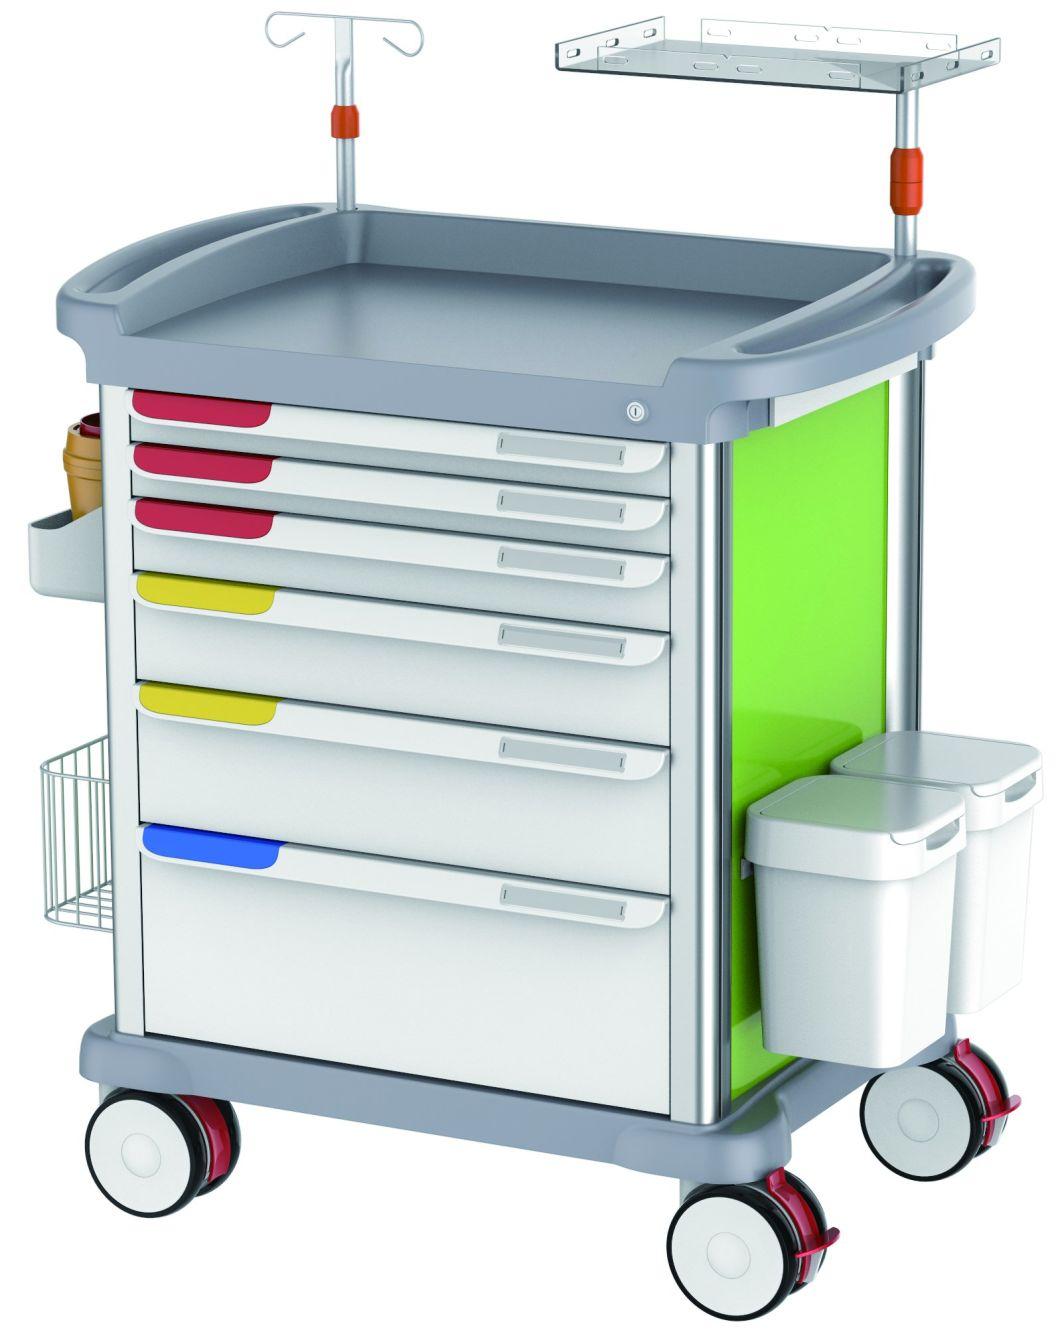 Cheap Mobile ABS Drugs Hospital Medical Emergency Medicine Trolley